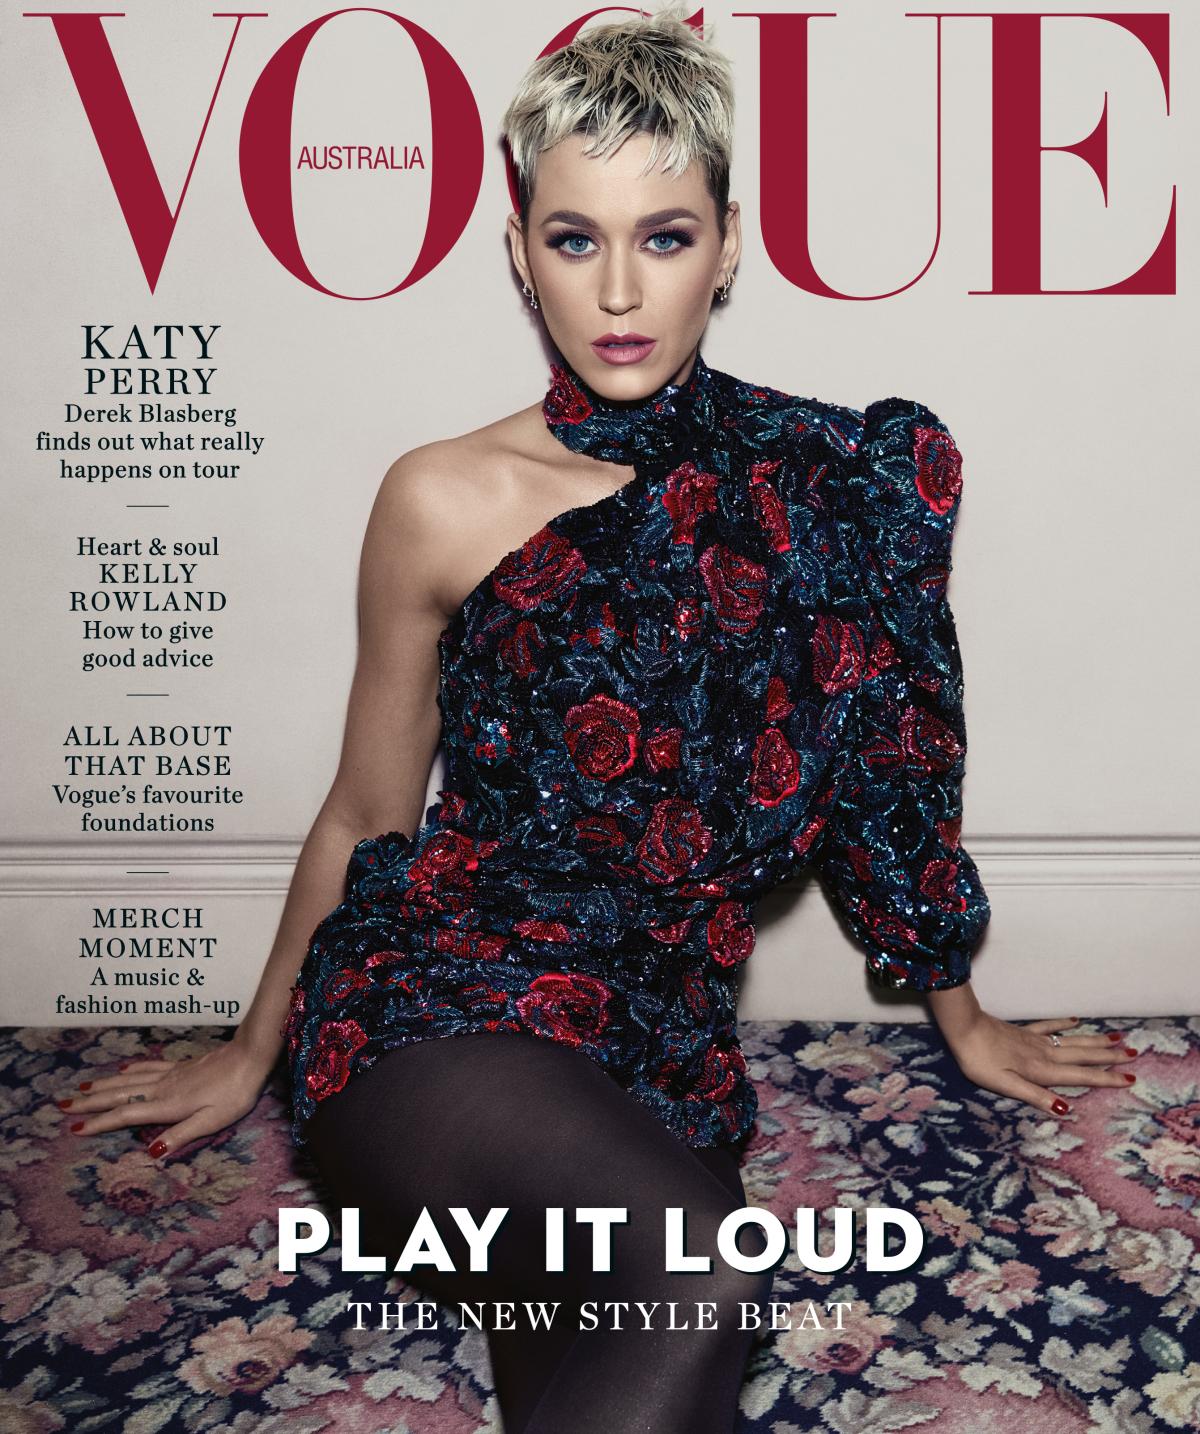 Katy Perry on her career, meeting the Pope and protecting her relationship  with Orlando Bloom - Vogue Australia